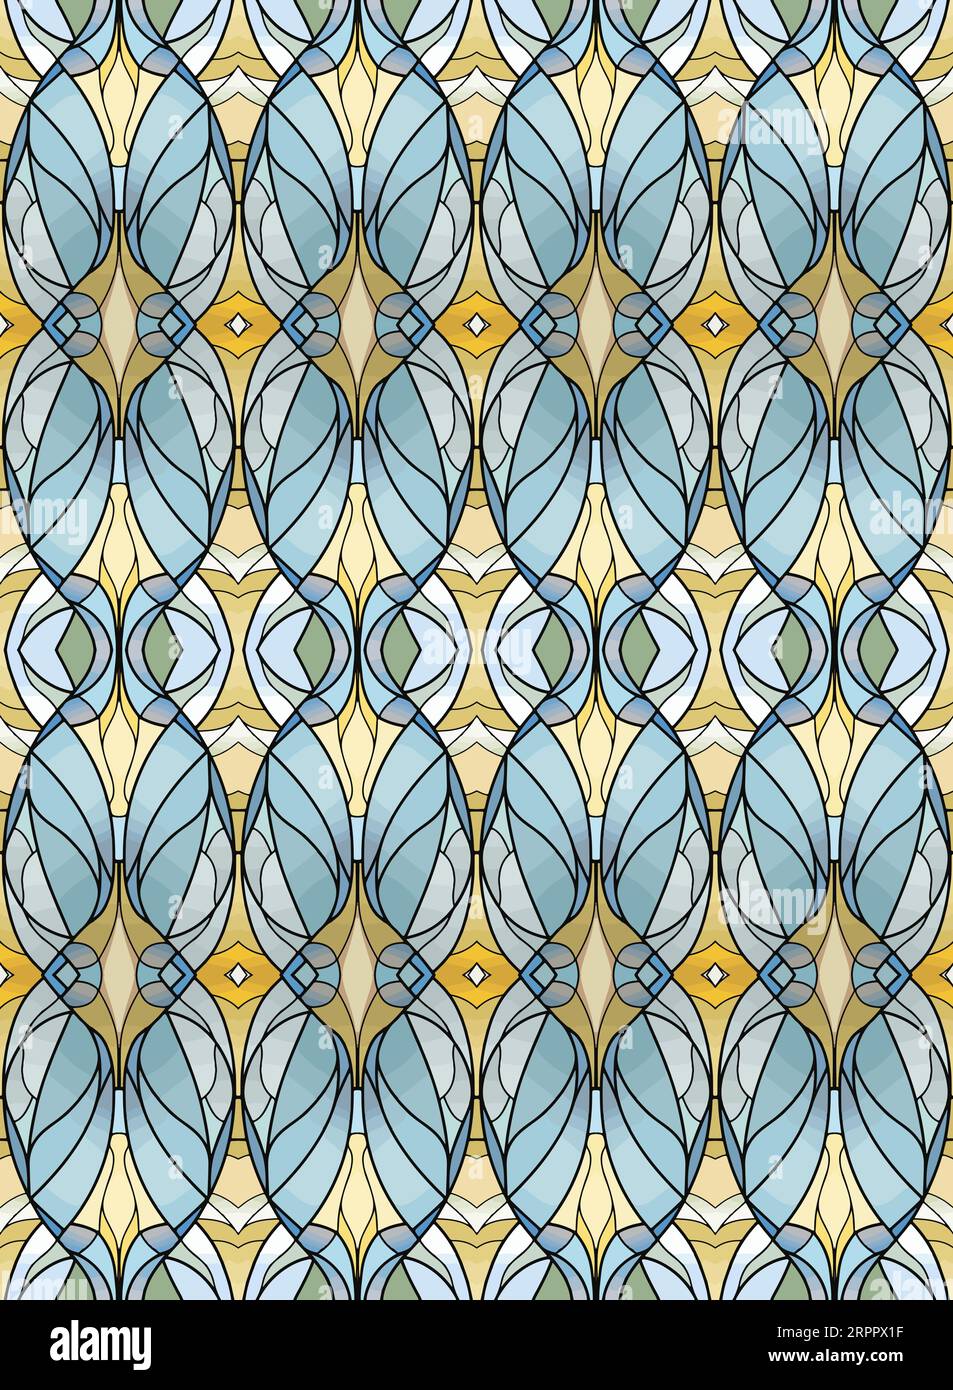 Seamless, repeating art nouveau floral oval background in tan, blue, yellow, and green. Stock Vector